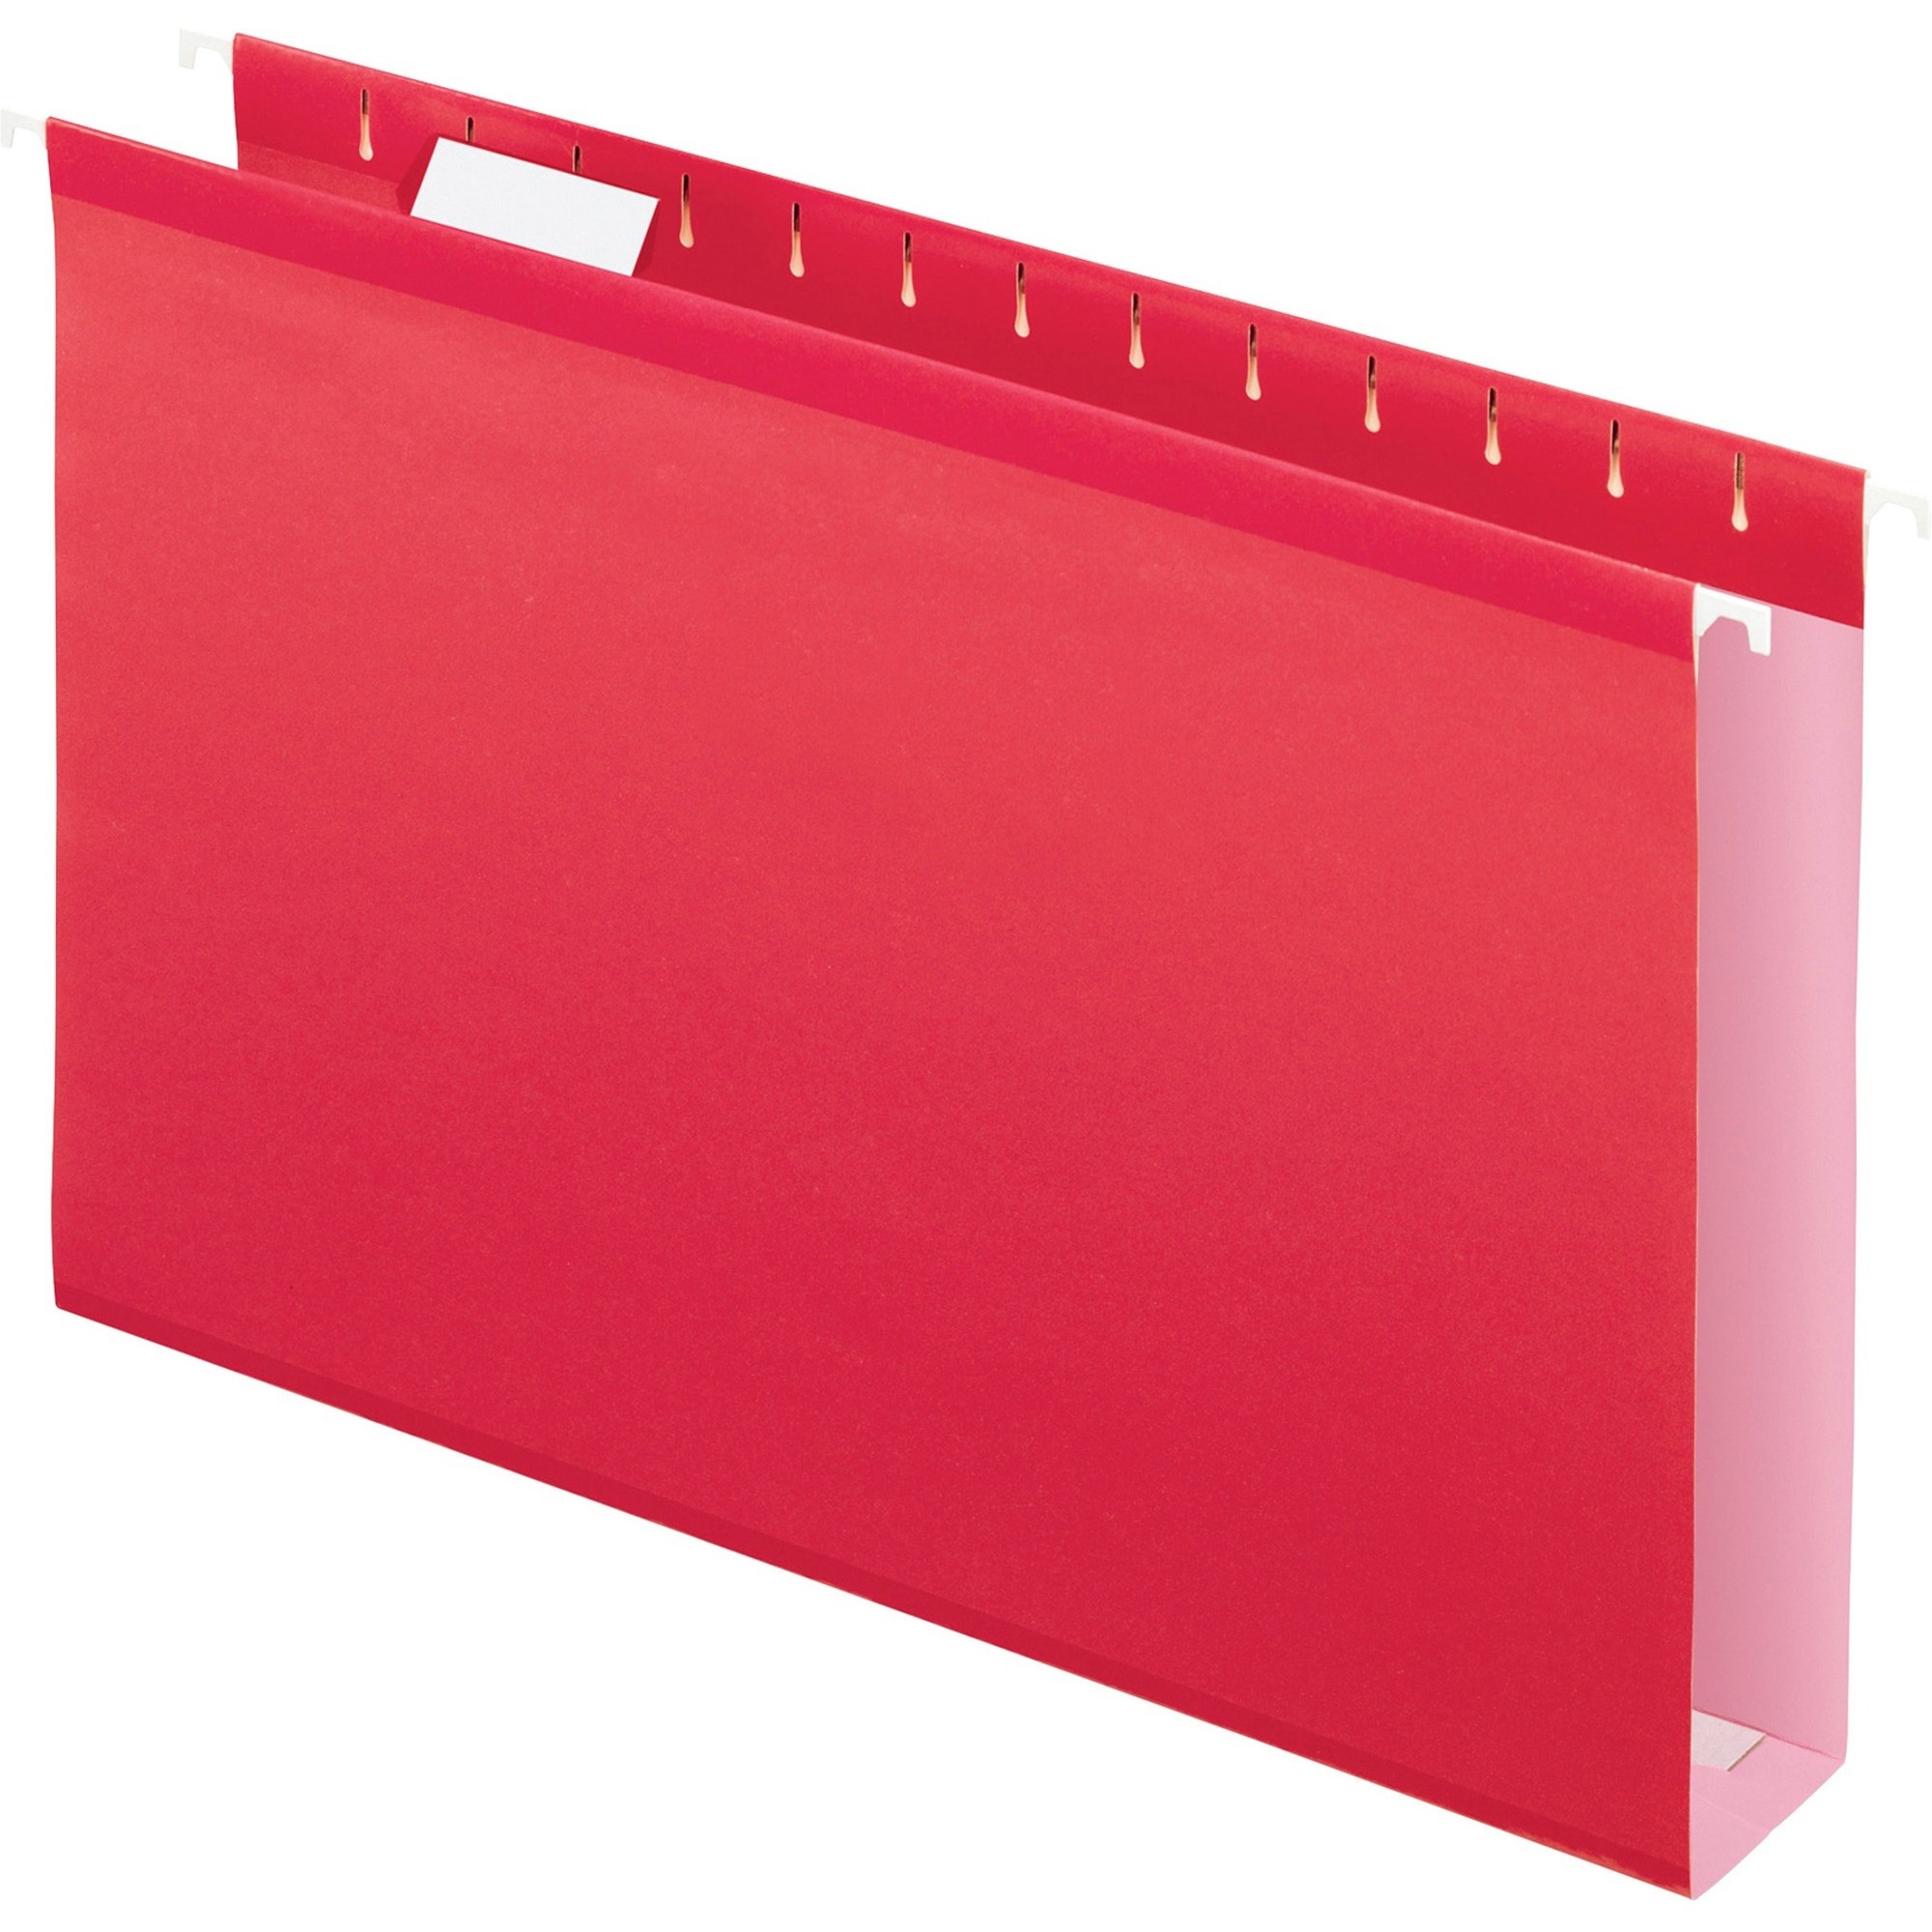 Pendaflex 1/5 Tab Cut Legal Recycled Hanging Folder - 8 1/2" x 14" - 2" Expansion - Pressboard, Poly - Red - 10% Recycled - 25 /